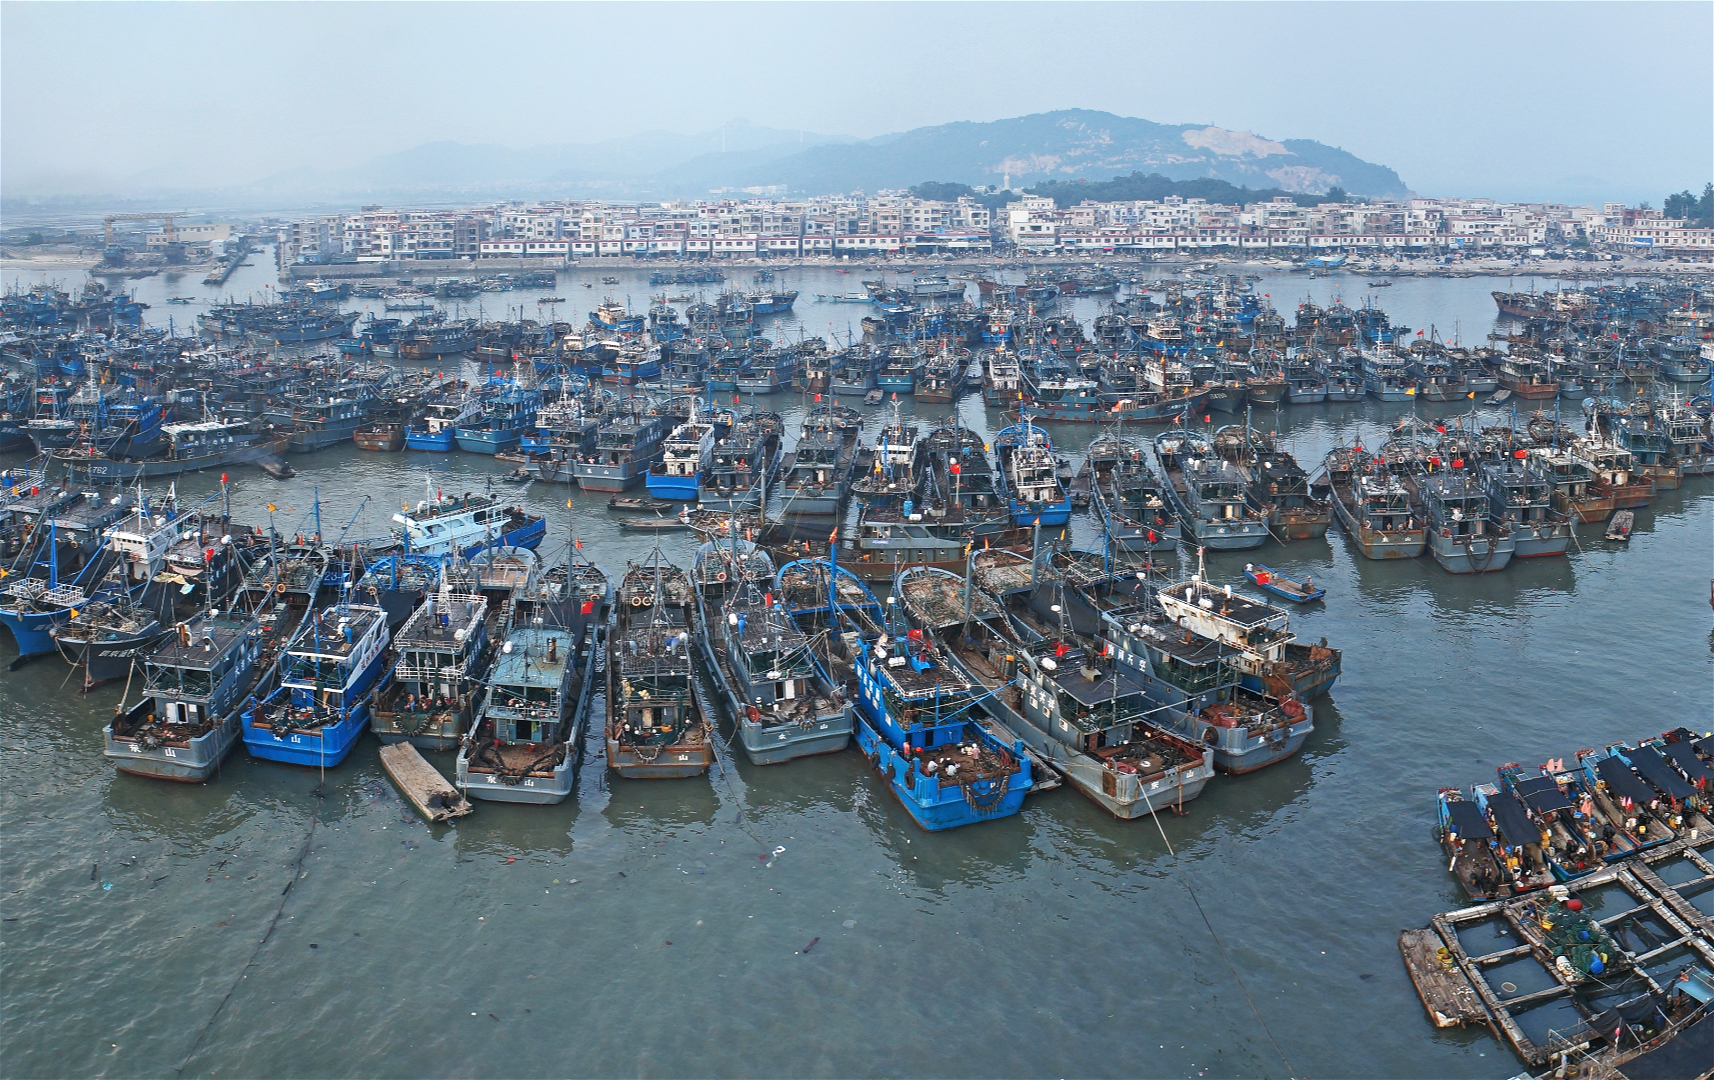 <p>Fishing vessels moored in the port of Zhangzhou, Fujian Province, 31 July 2014. (Image by <a href="http://www.greenpeace.org/eastasia/news/blog/5-problems-with-chinas-distant-water-fishing-/blog/57210/" target="_blank" rel="noopener">Wen Wenyu / Greenpeace</a>)</p>